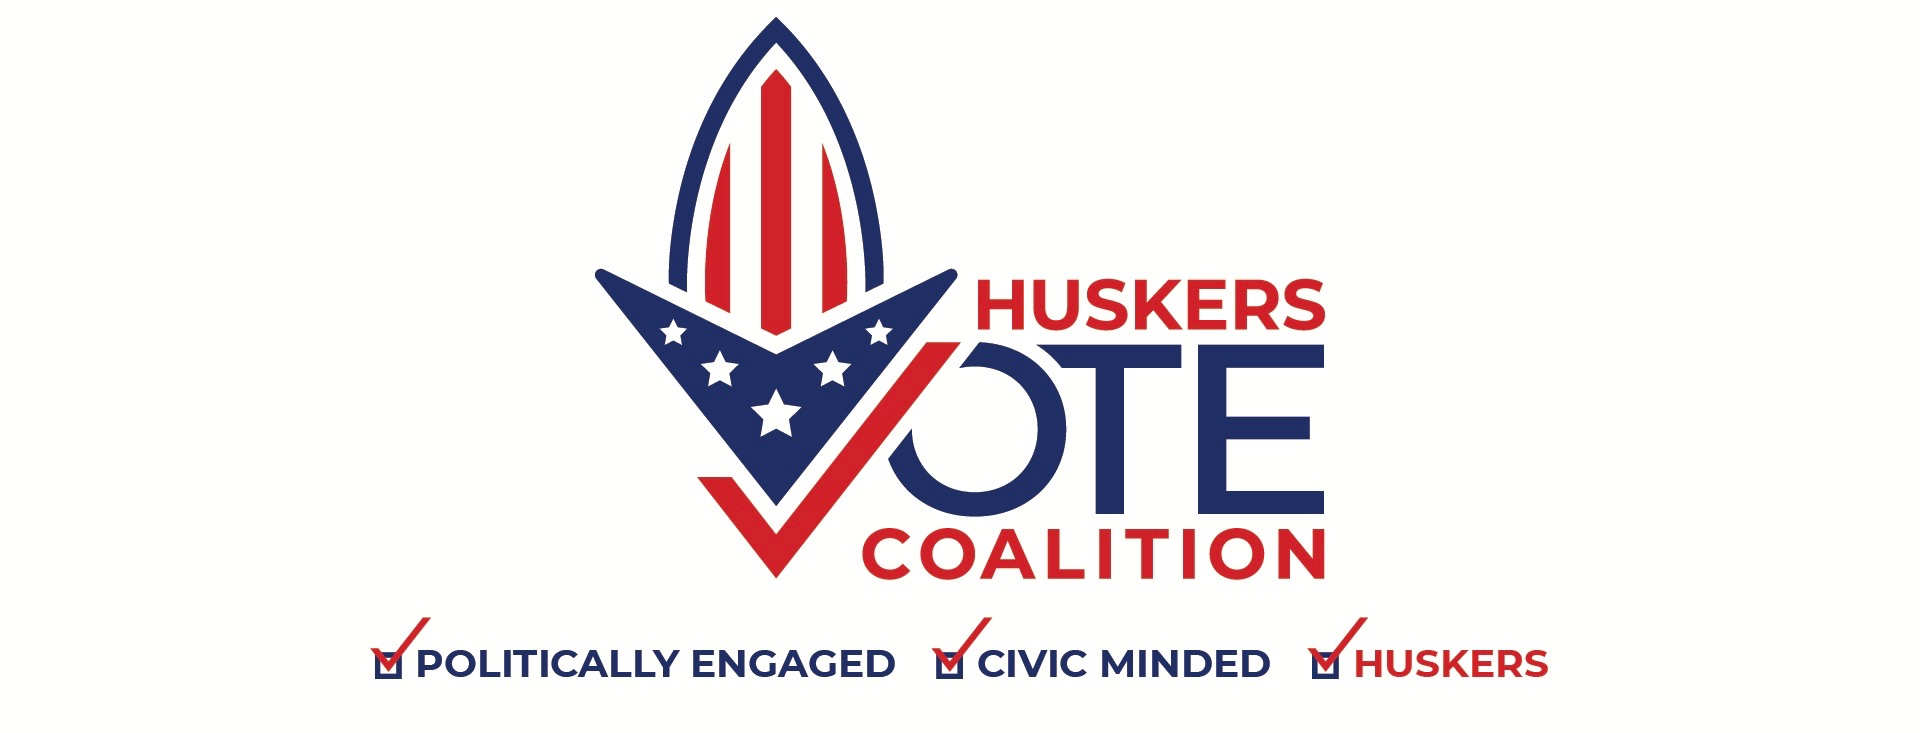 The Huskers Vote Coalition encourages students to become active and engaged citizens.